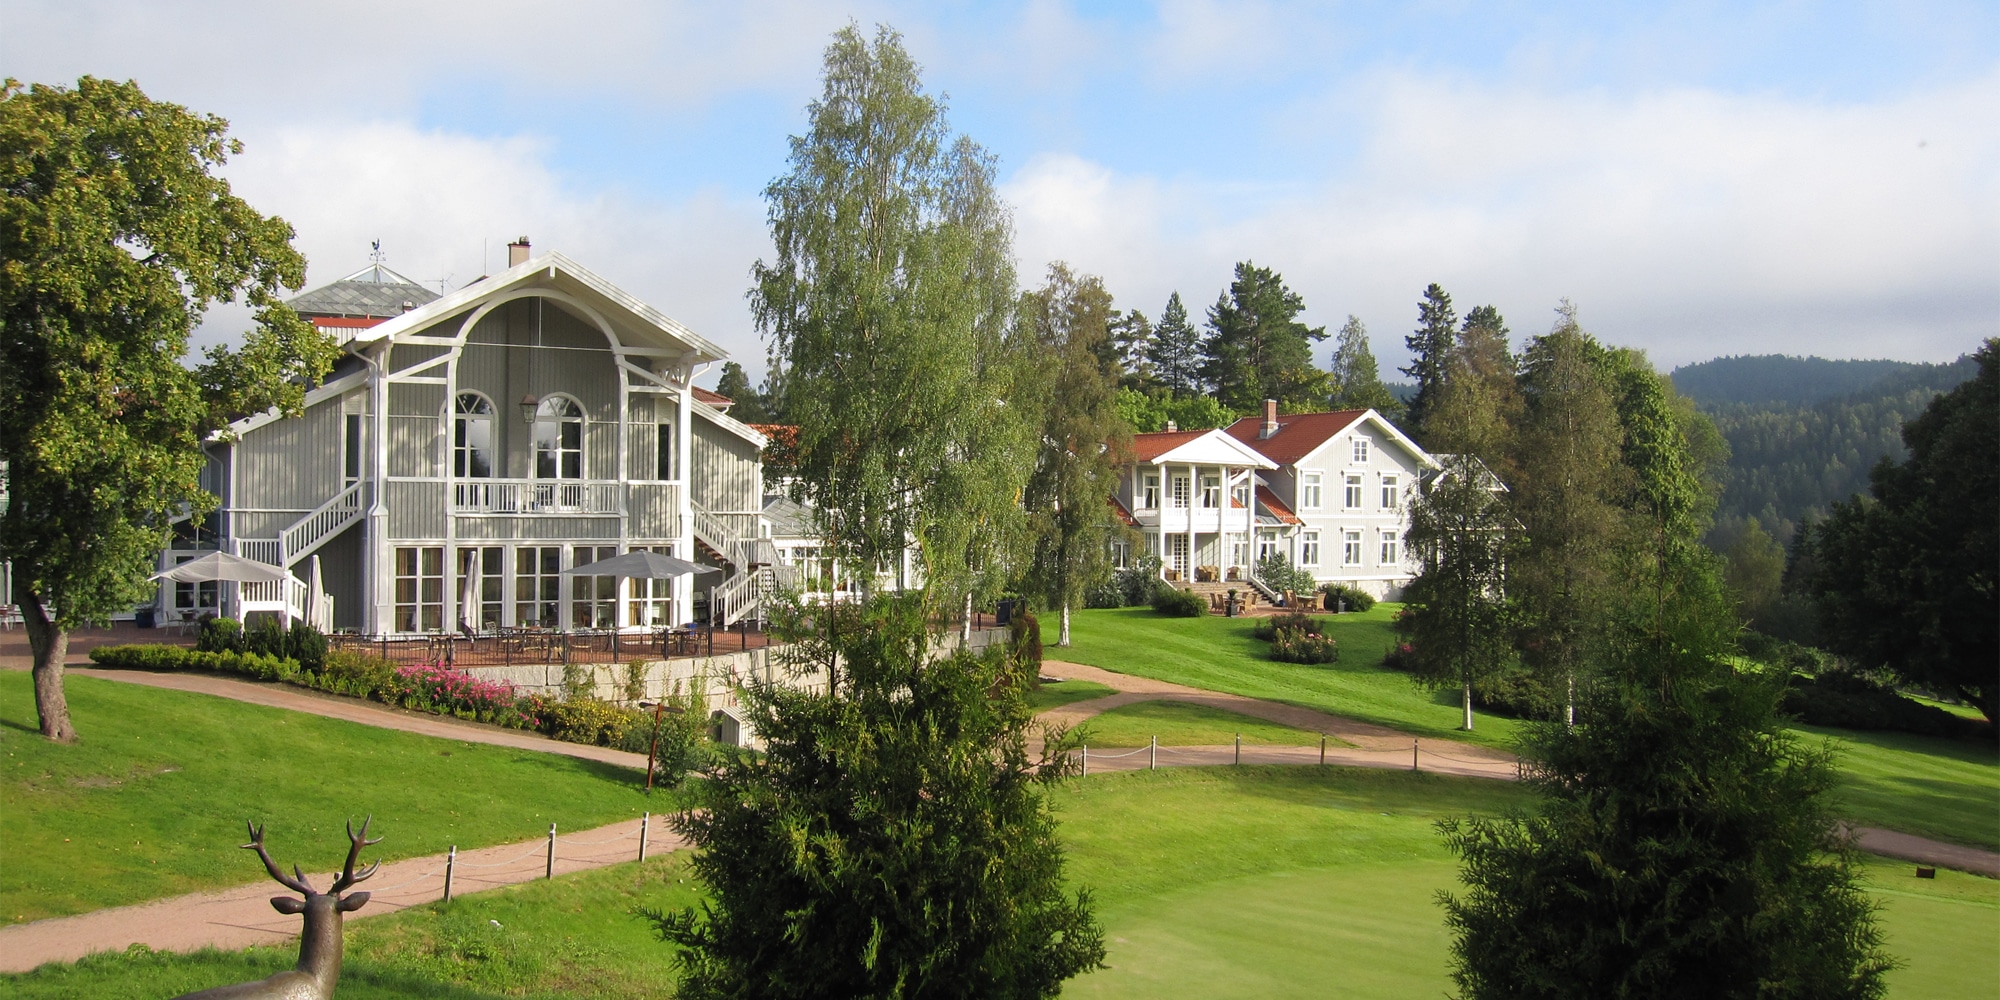 View of Losby Manor, a suburb of Oslo where the Oslo Forum is being held. File photo.